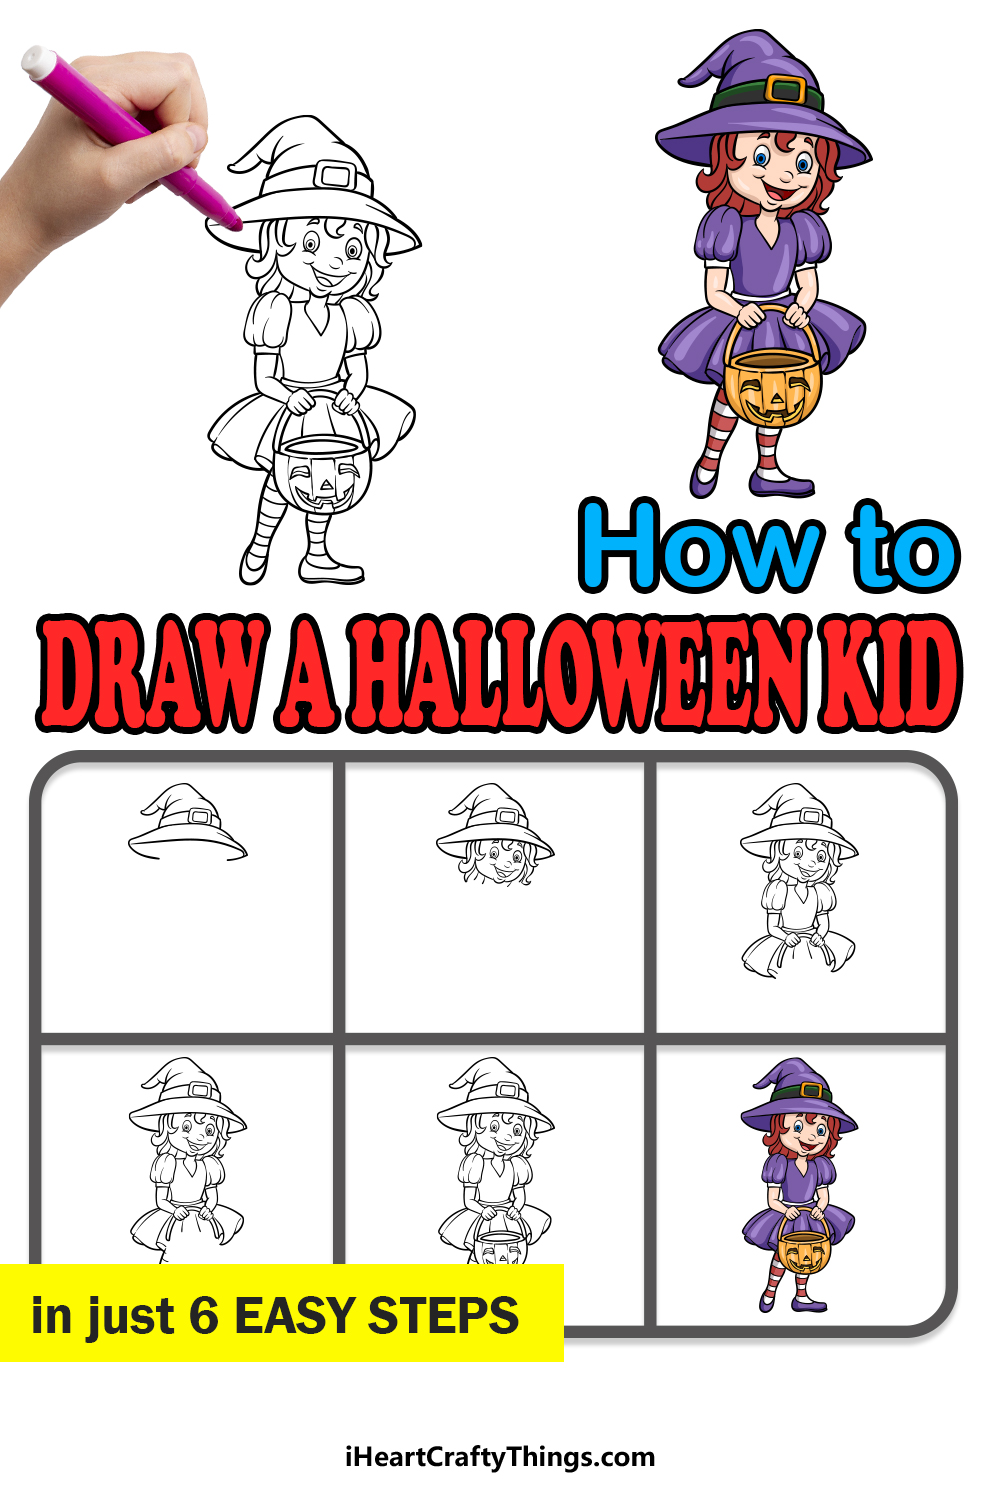 how to draw a Halloween Kid in 6 easy steps